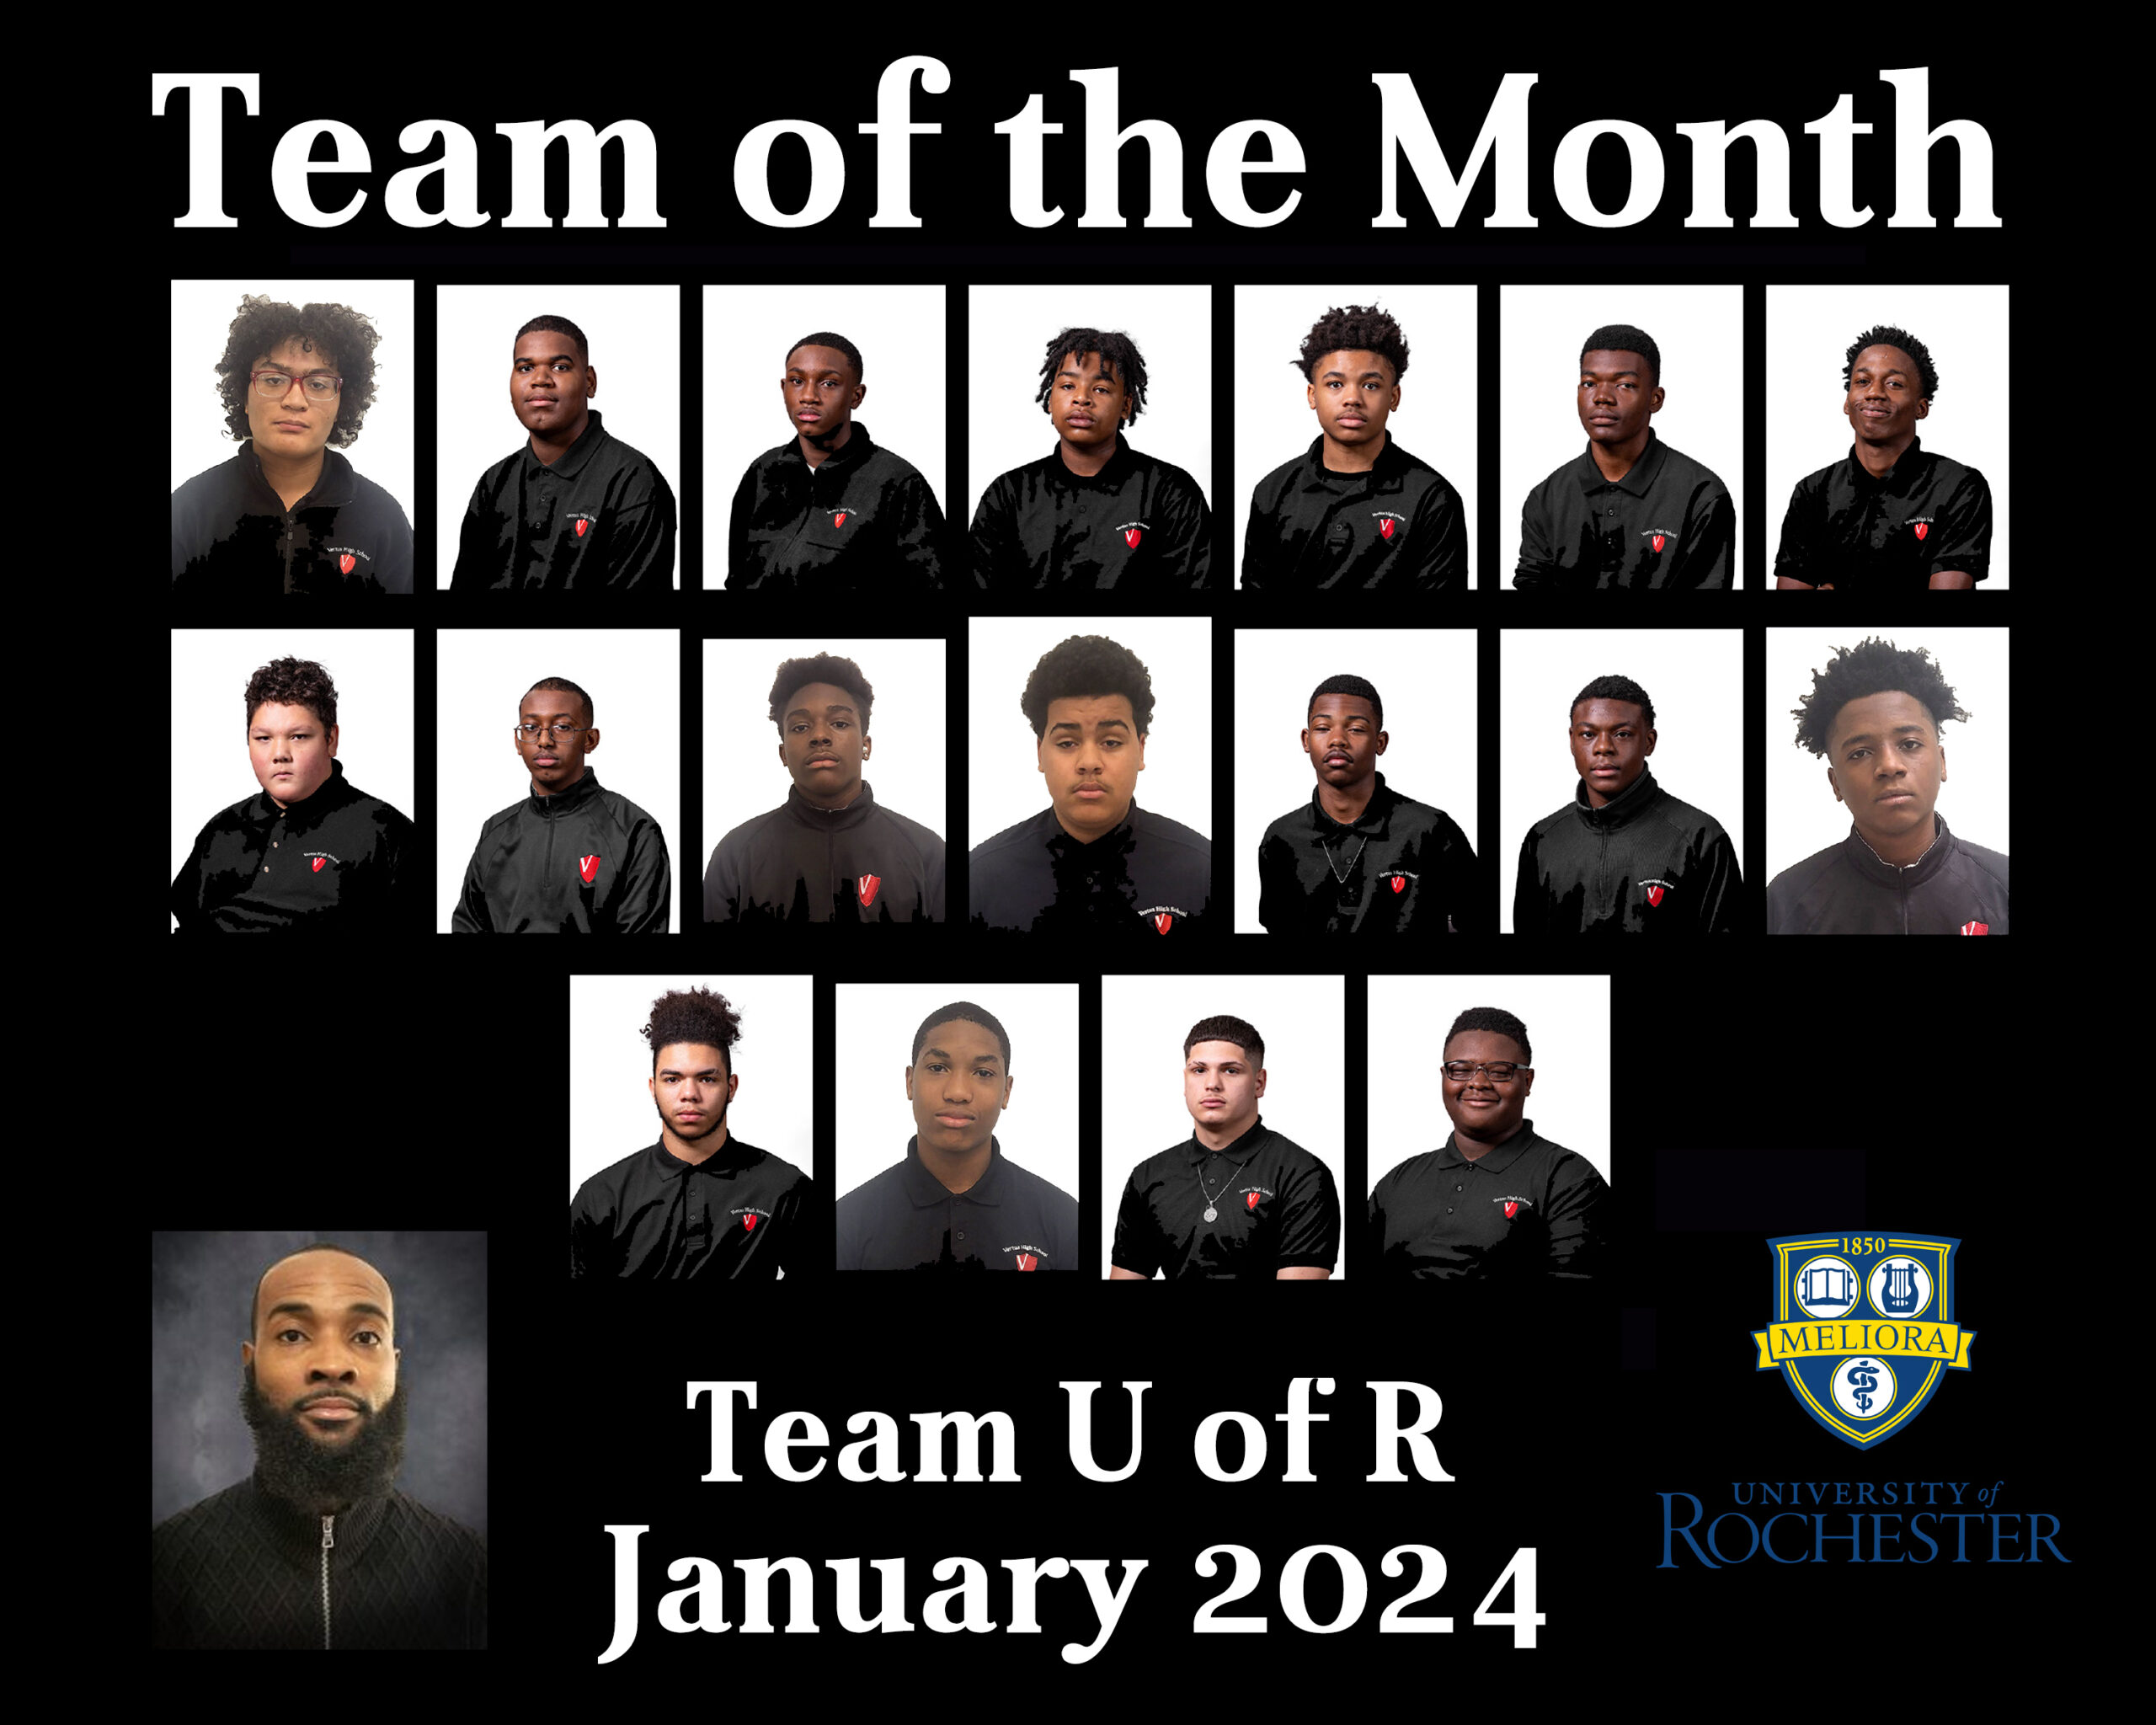 Team of the Month - January 2024